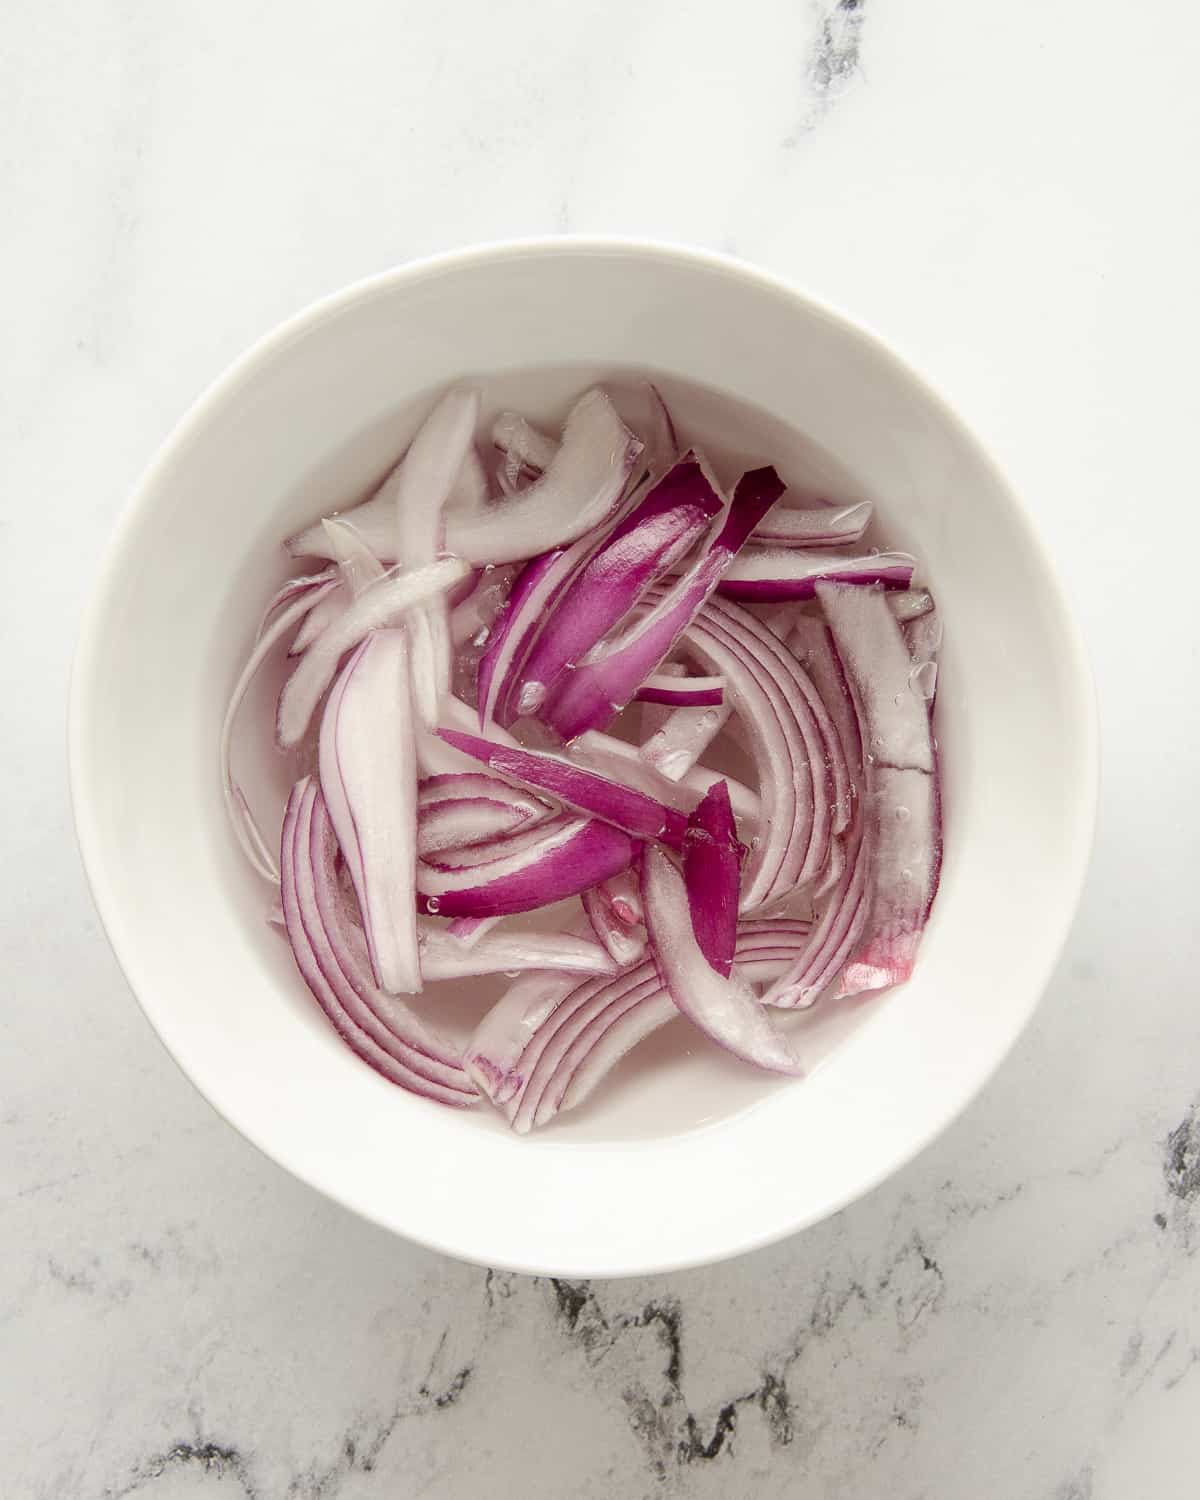 Thin sliced red onion in a bowl submerged in water to reduce the harshness of the onion.